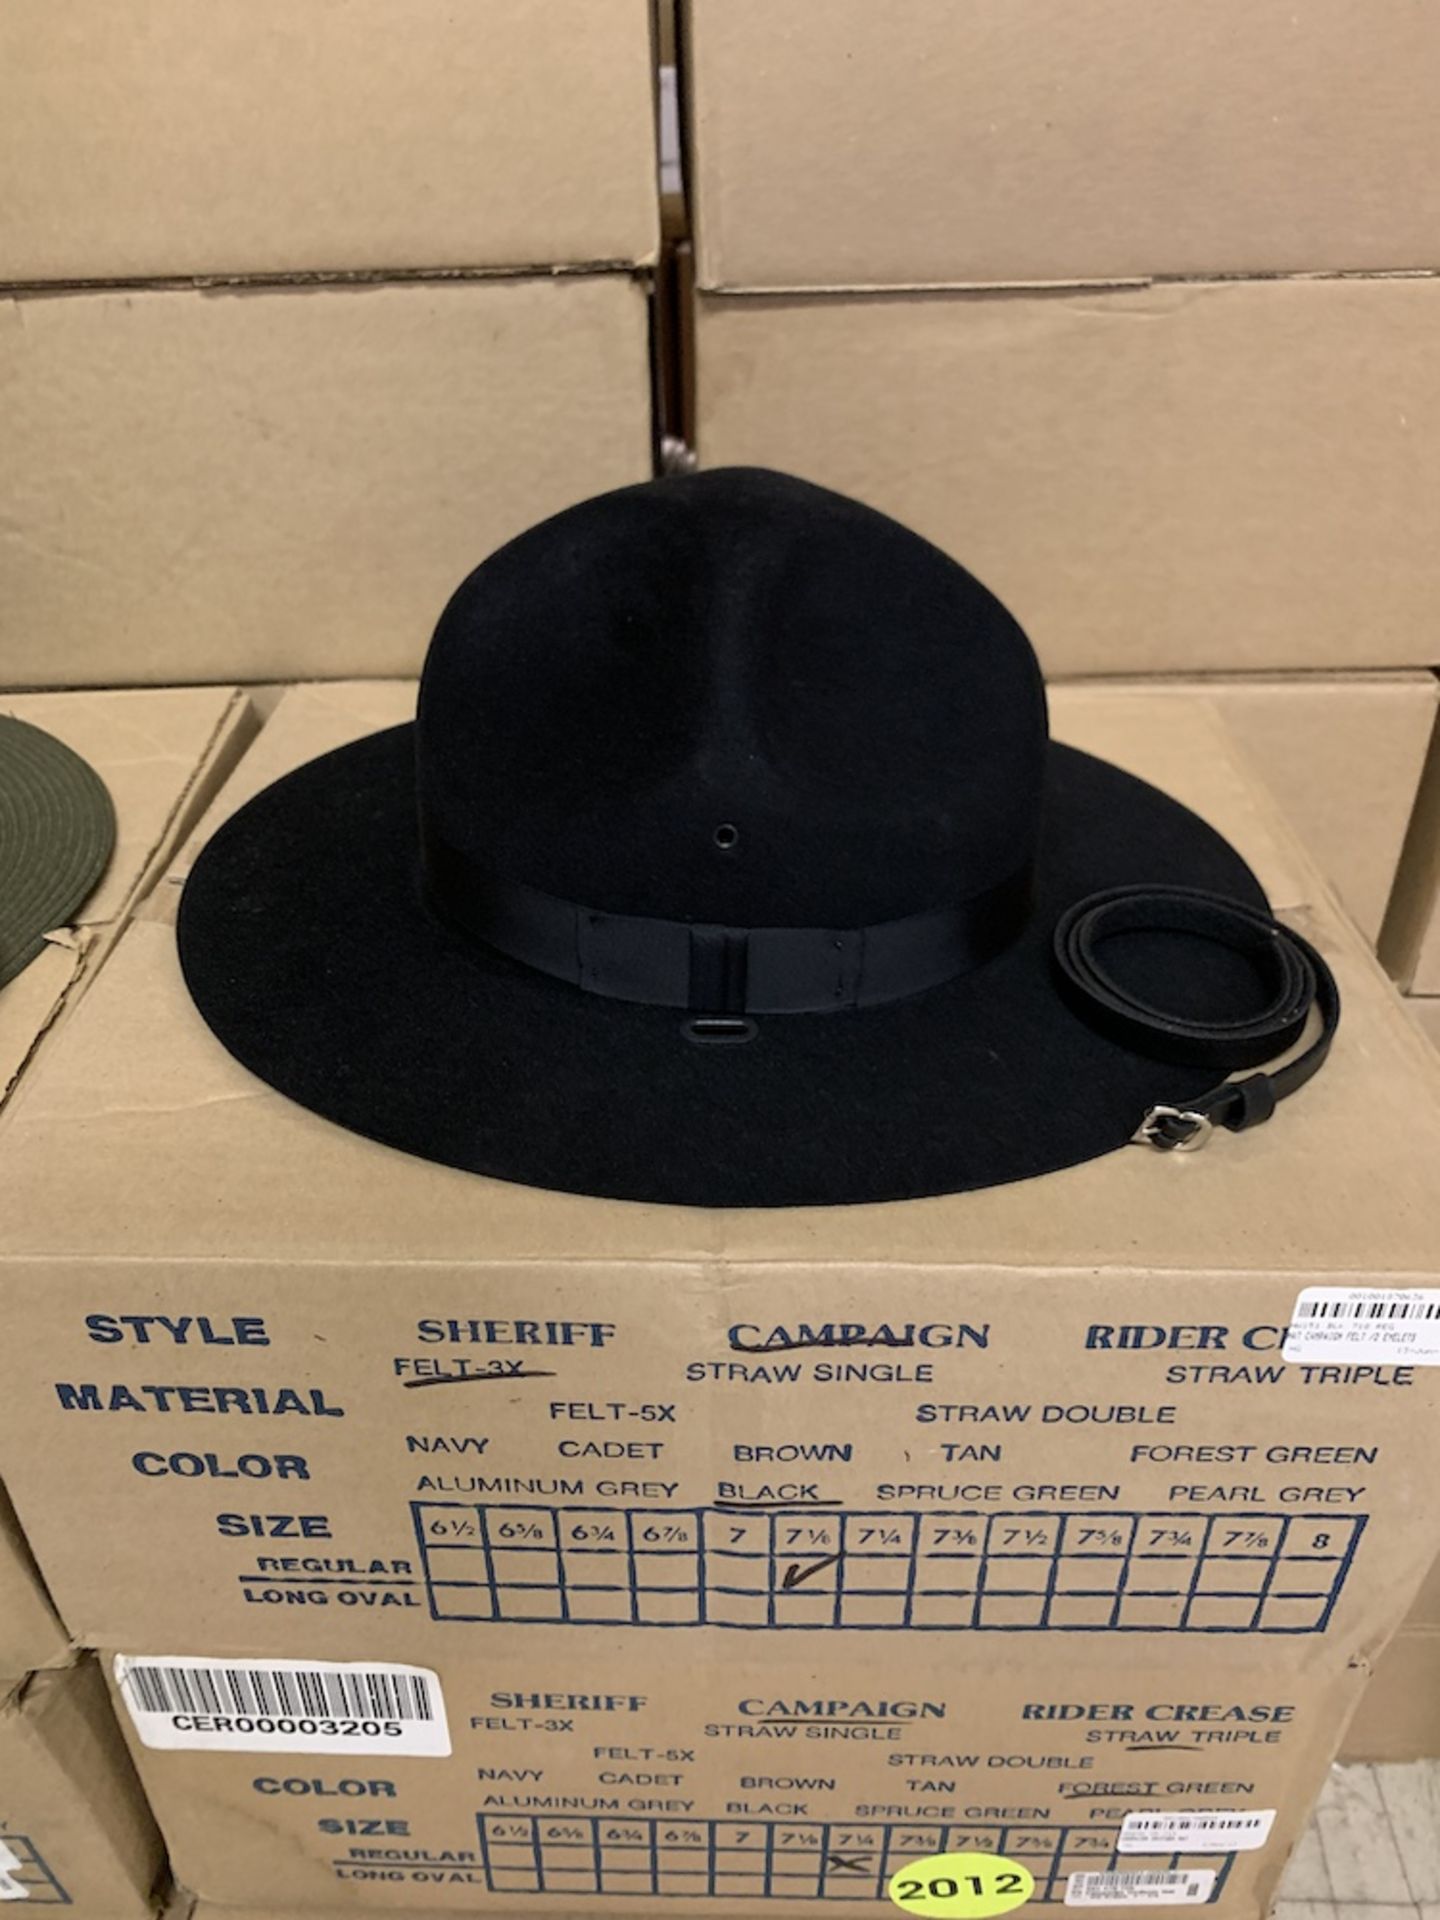 10 Campaign Uniform Hats, 9 The Lawman in Forest Green, 1 Campaign Black Felt Beaver Quality, New - Image 4 of 7